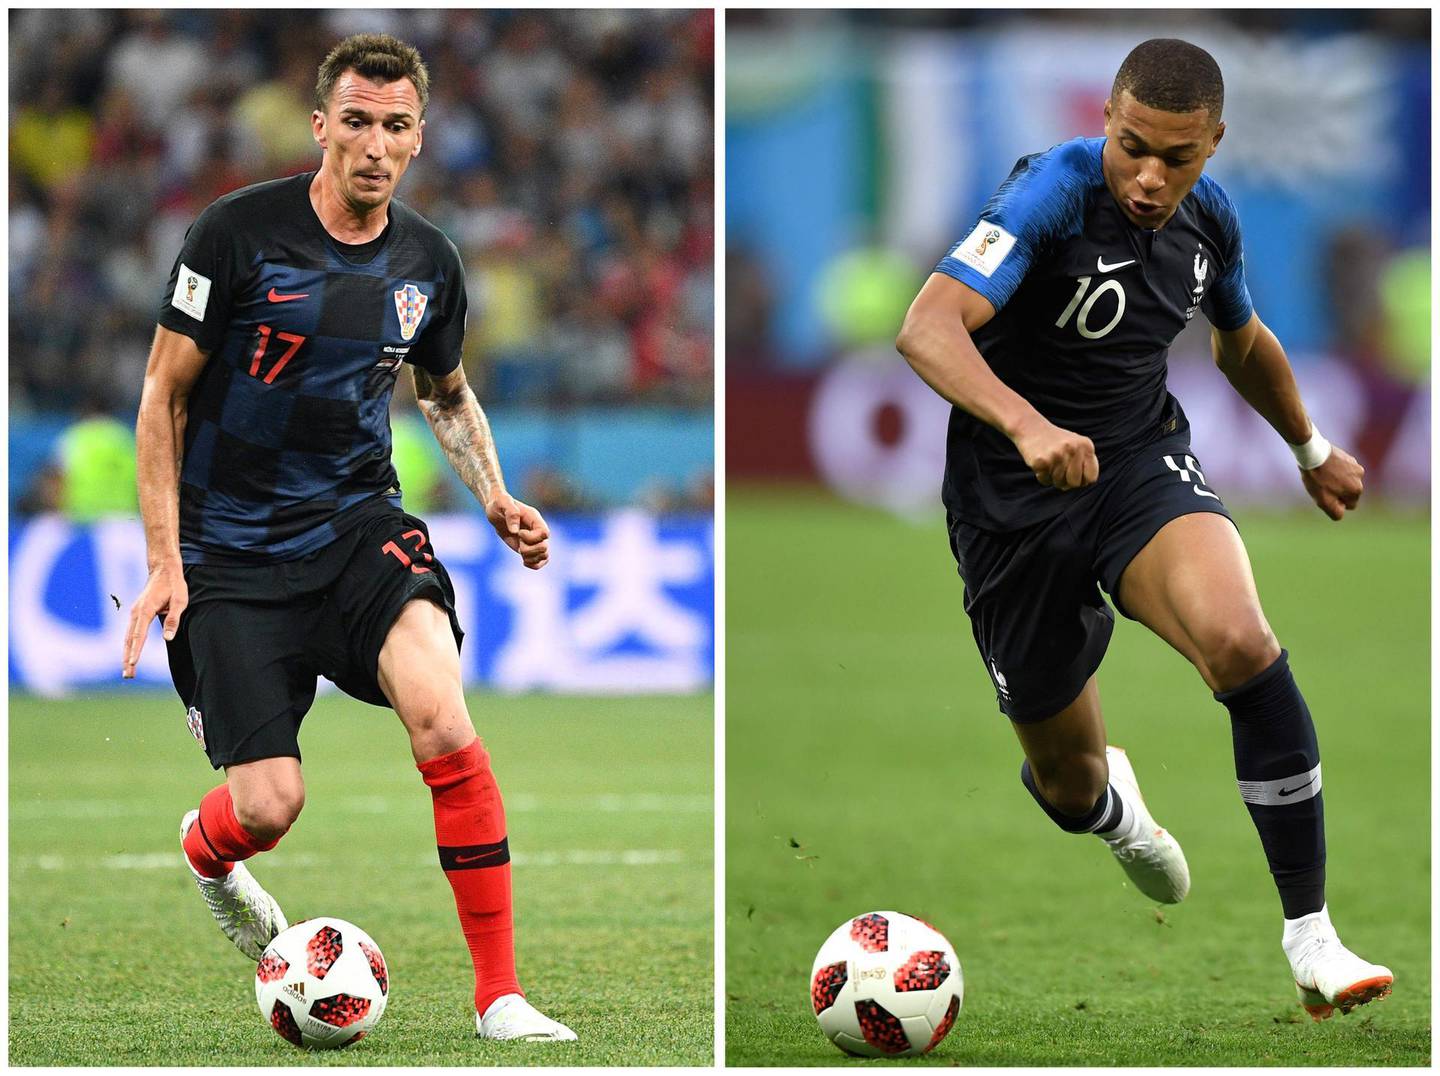 A combination of file pictures shows France's forward Kylian Mbappe (R) in Saint Petersburg on July 10, 2018 and Croatia's forward Mario Mandzukic in Nizhny Novgorod on July 1, 2018 during the Russia 2018 World Cup football tournament. France are firm favourites to win the final showpiece in Moscow on July 15, 2018 and become world champions for the second time -- 20 years after their first triumph in 1998. But they will come up against a hungry Croatia side. - 
 / AFP / Gabriel BOUYS AND Johannes EISELE
